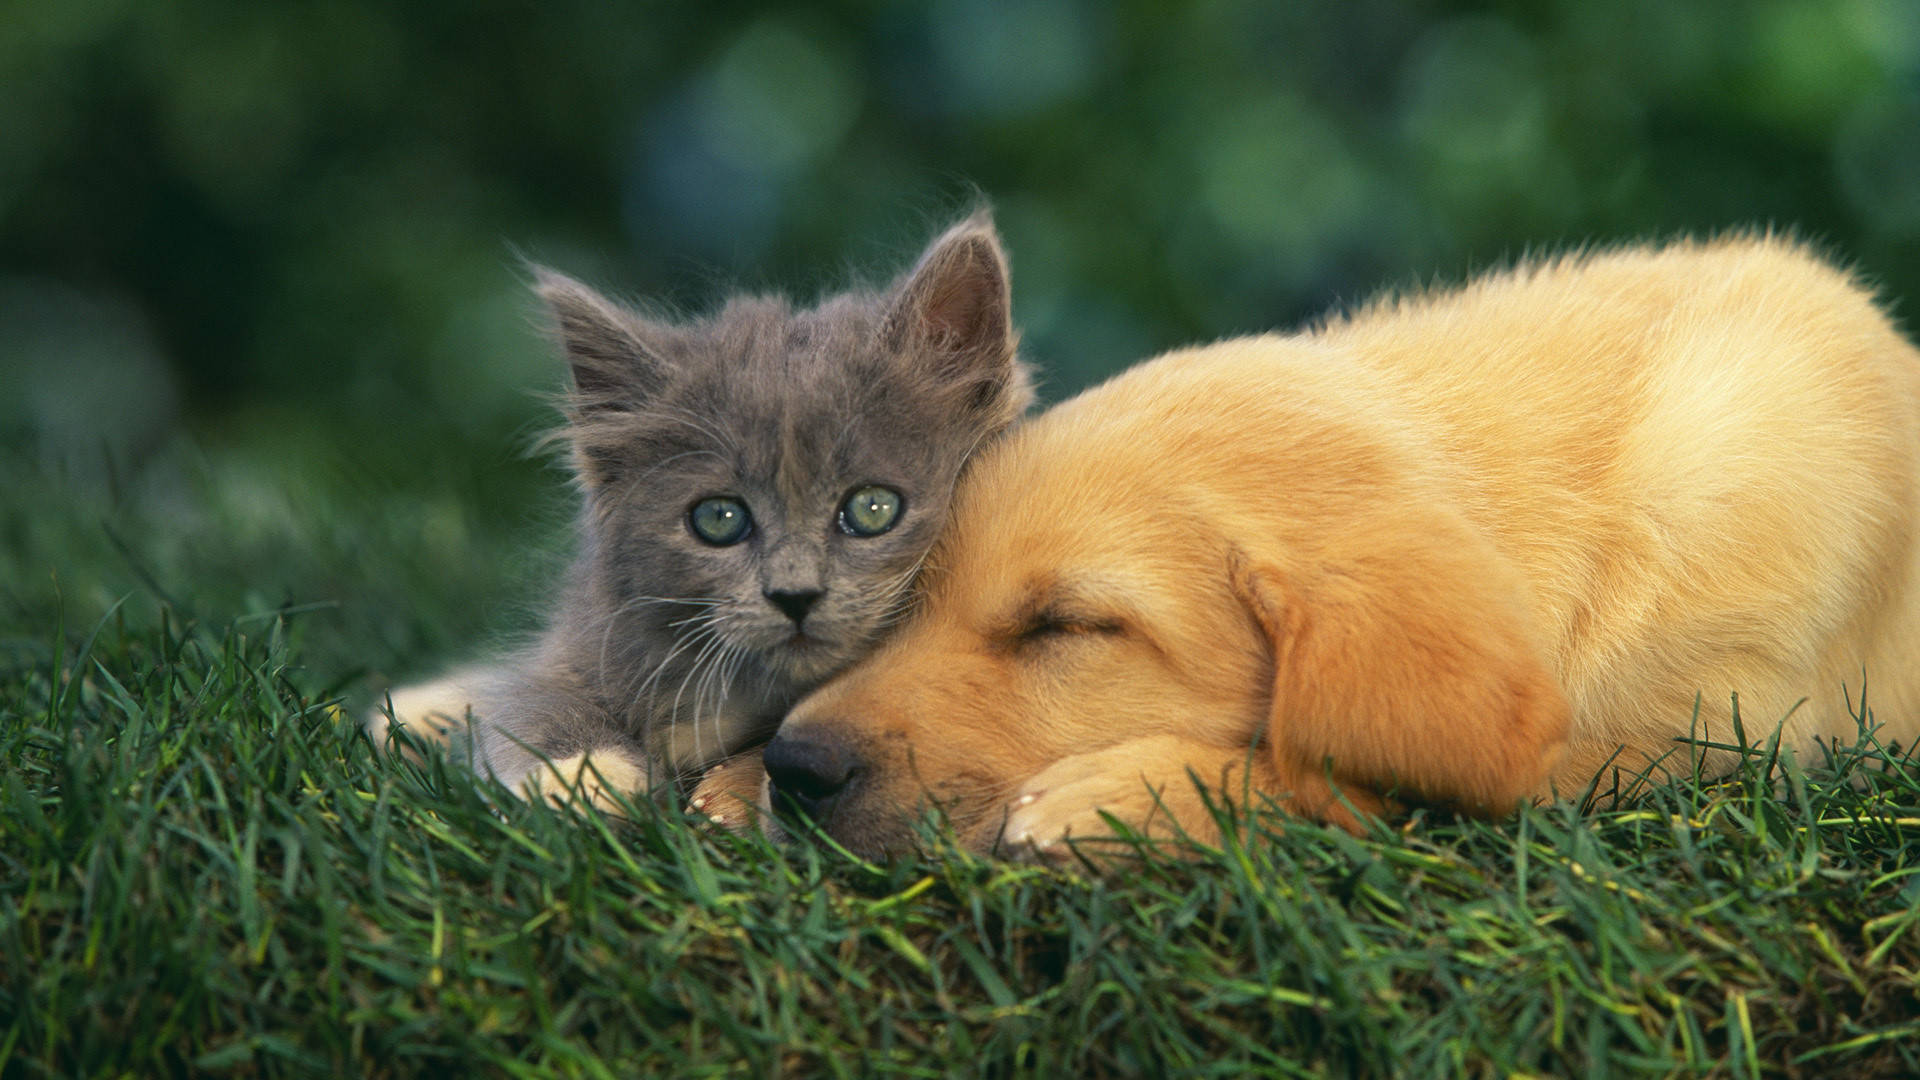 Cat And Dog On Grass Wallpaper